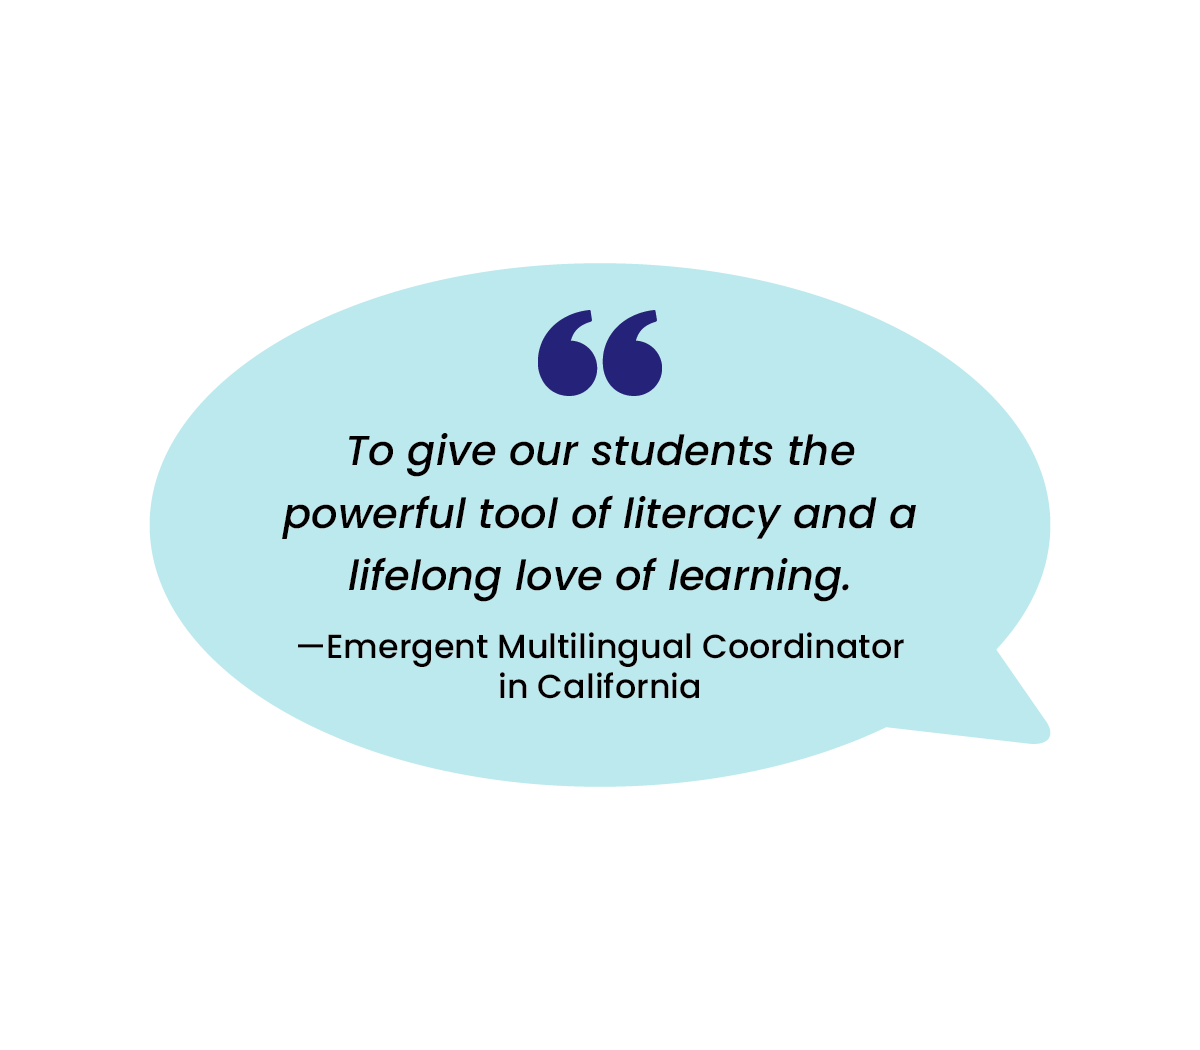 "To give our students the powerful tool of Literacy and a lifelong love of learning." - Emergent Multilingual Coordinator in California